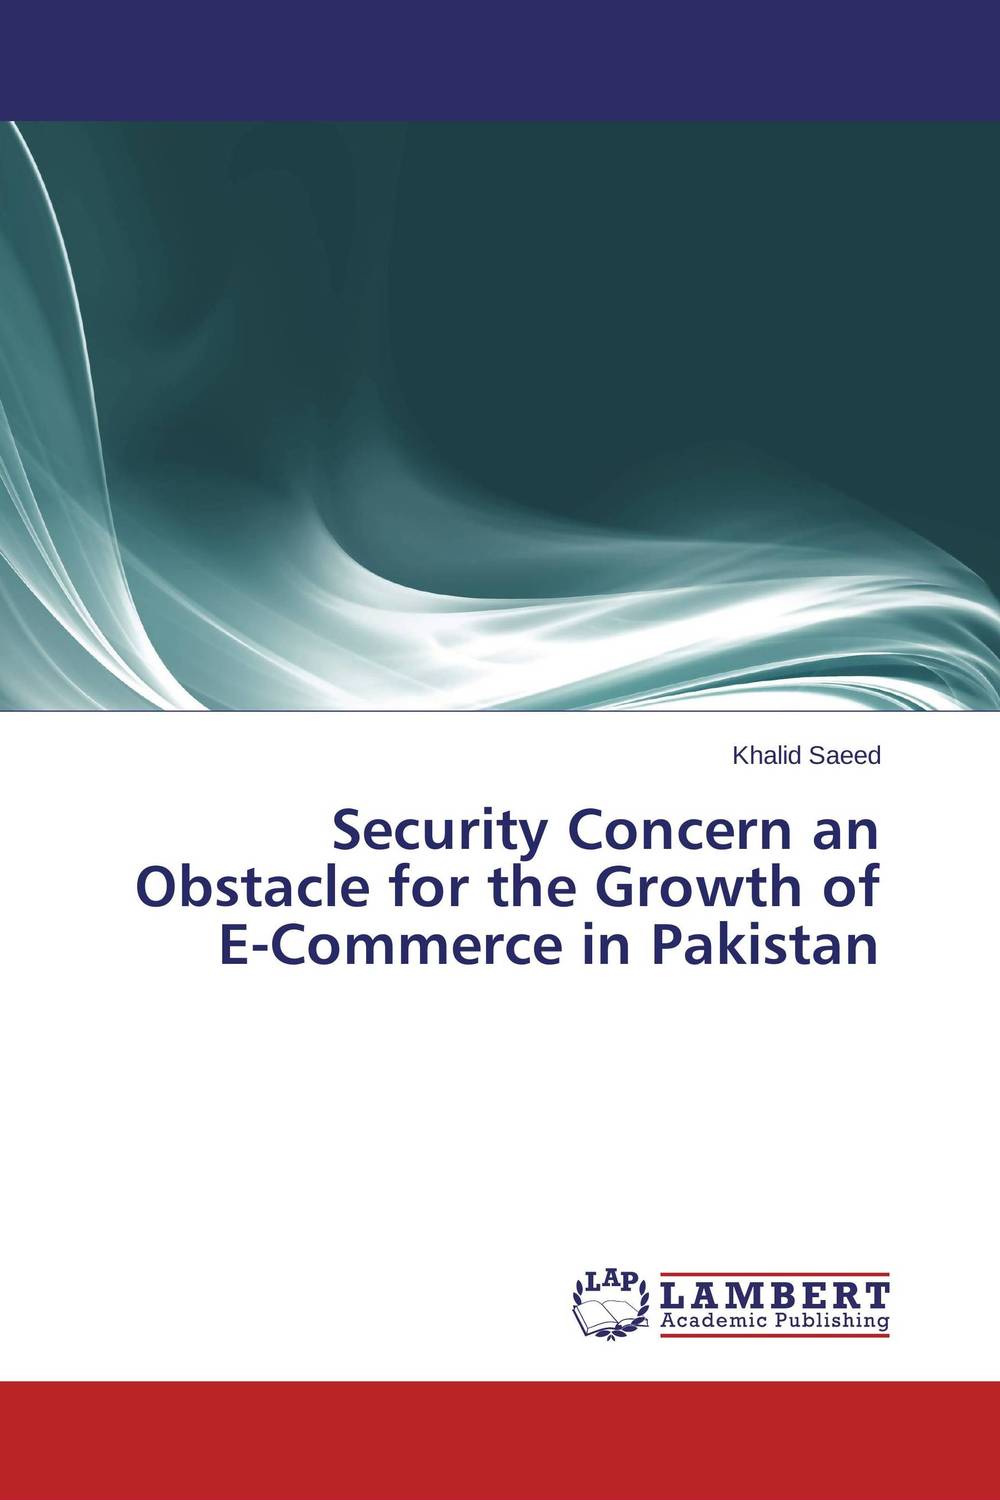 Security Concern an Obstacle for the Growth of E-Commerce in Pakistan